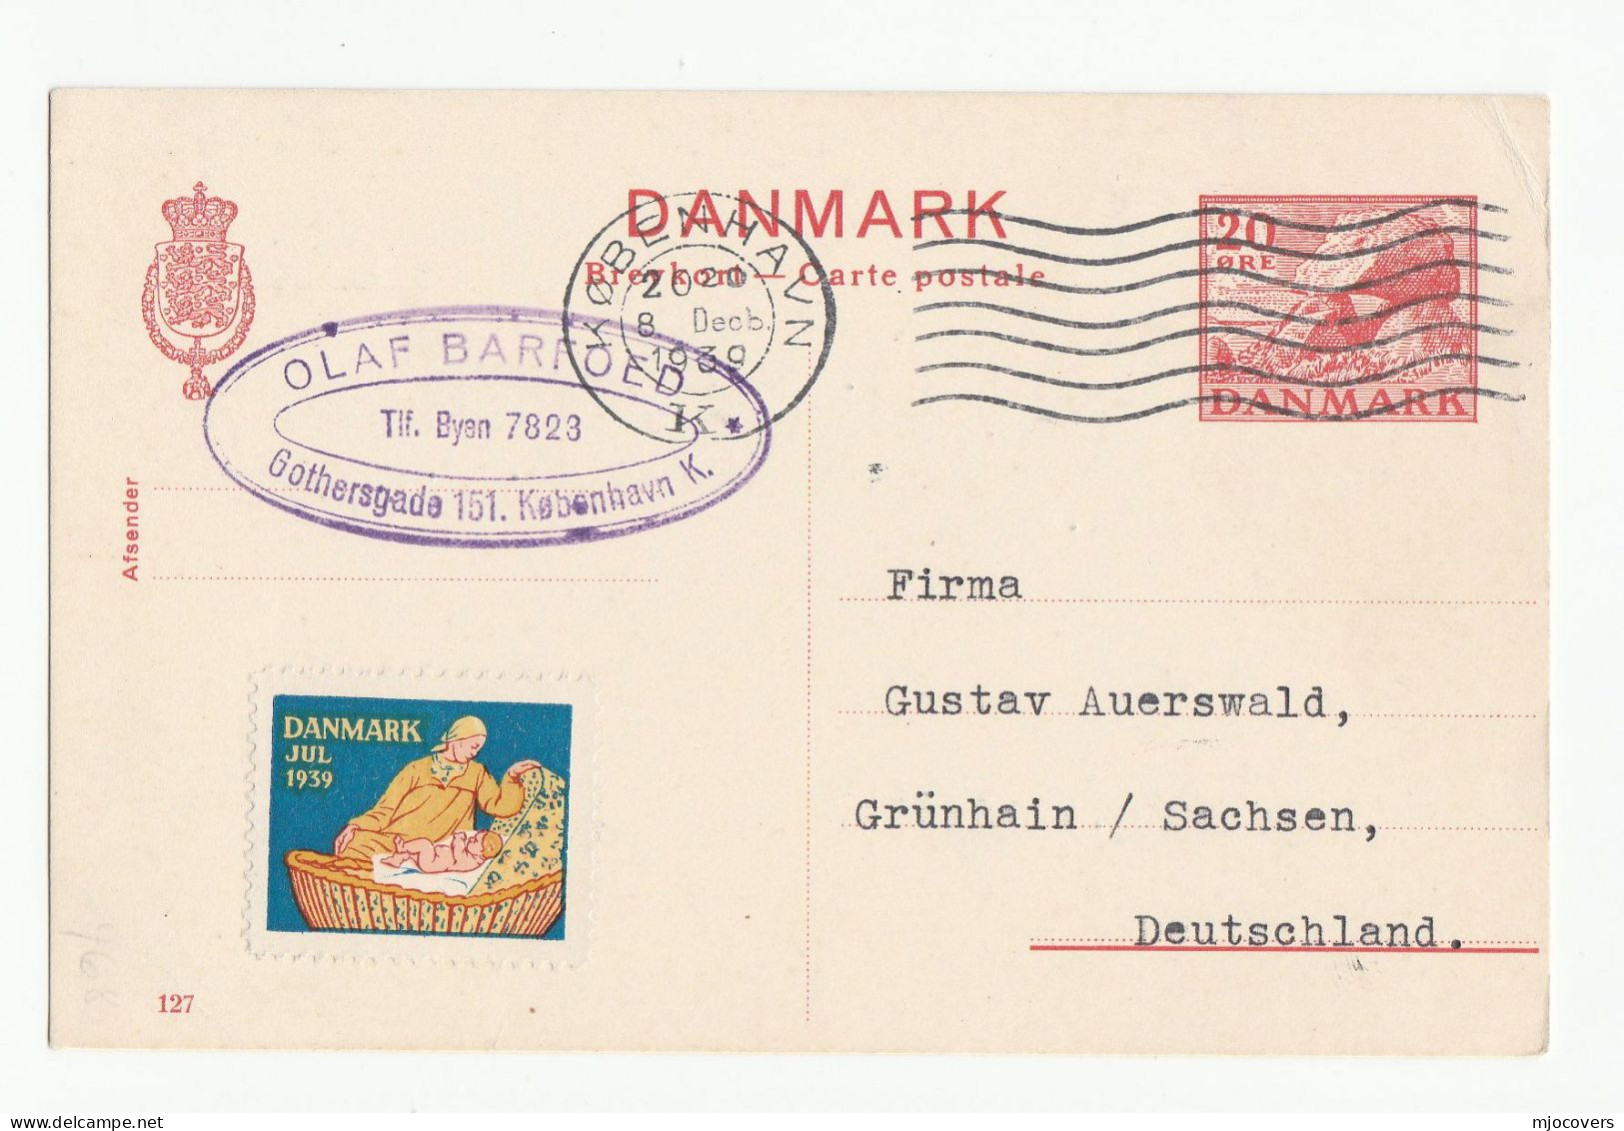 1939 DENMARK To Grunhain Germany With CHRISTMAS Label Women Baby POSTAL STATIONERY CARD Cover Stamps - Ganzsachen